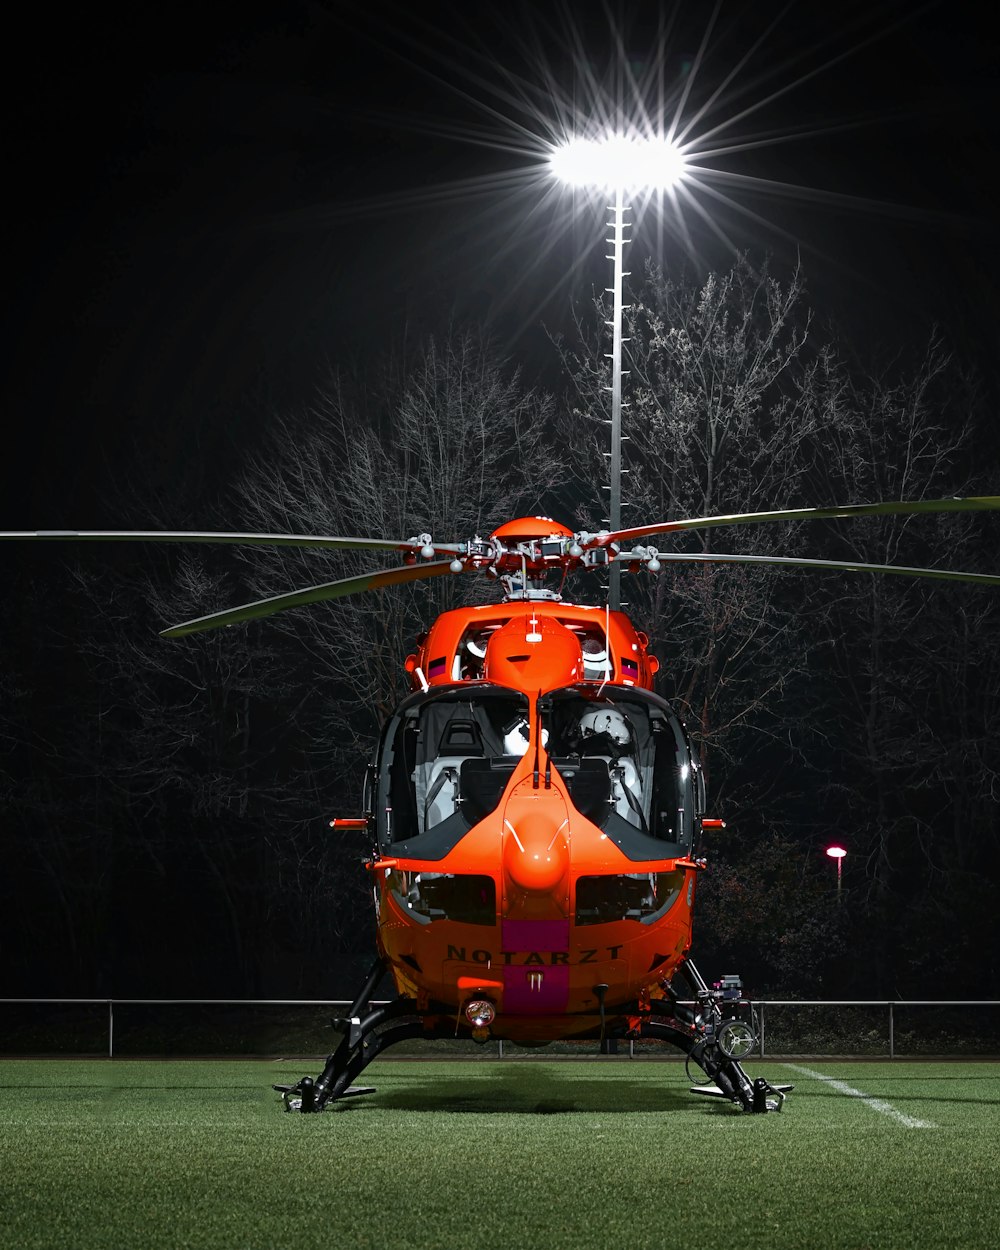 orange and black helicopter on green grass field during nighttime